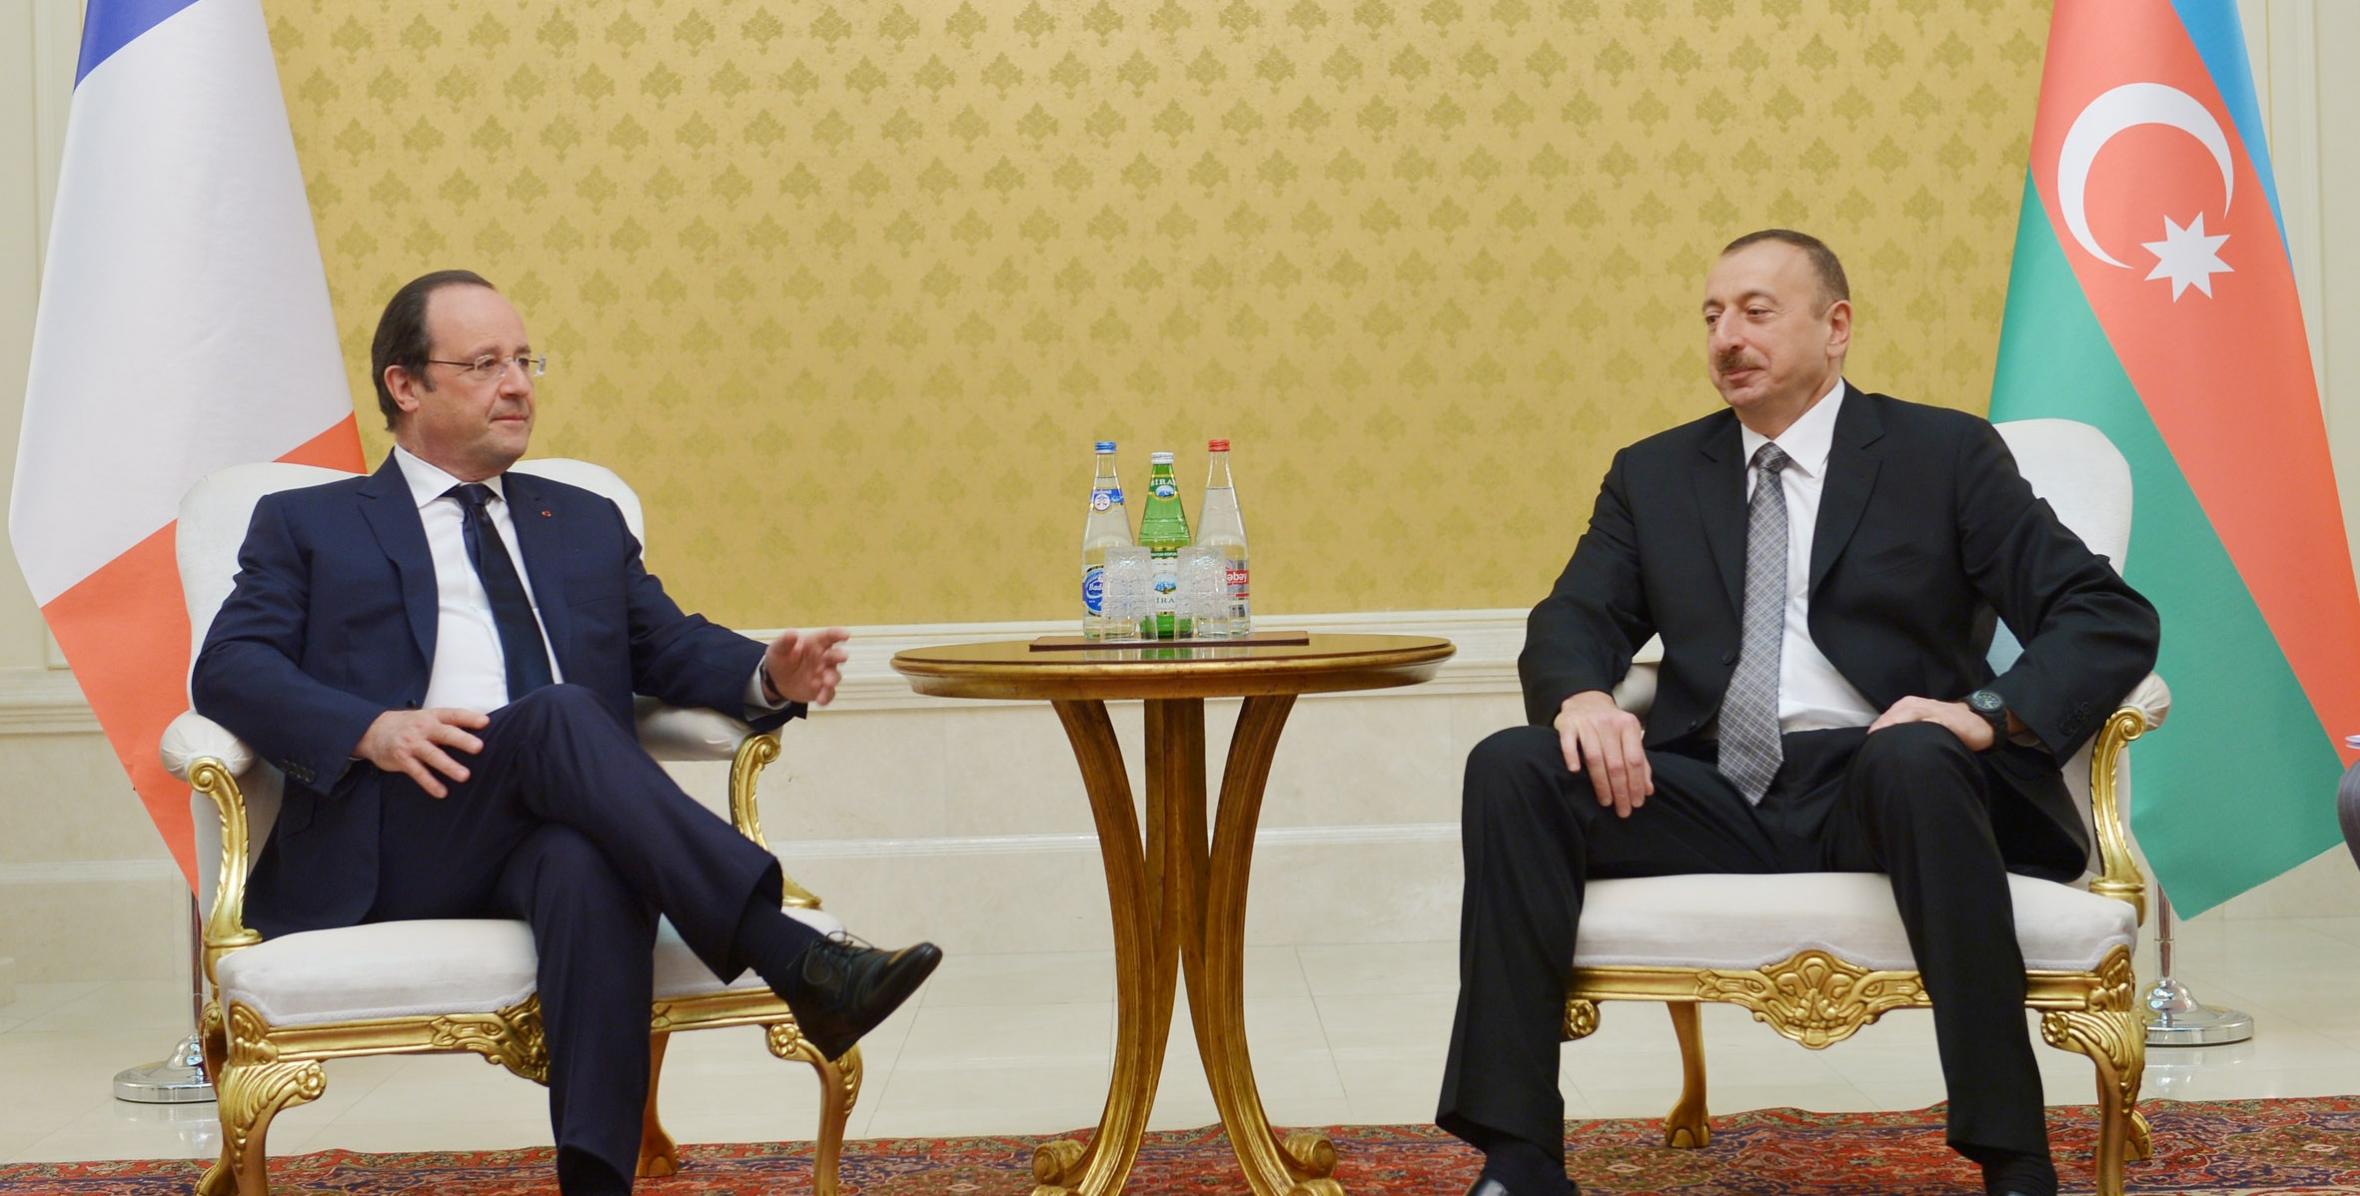 Ilham Aliyev and President of the French Republic Francois Hollande held a one-on-one meeting